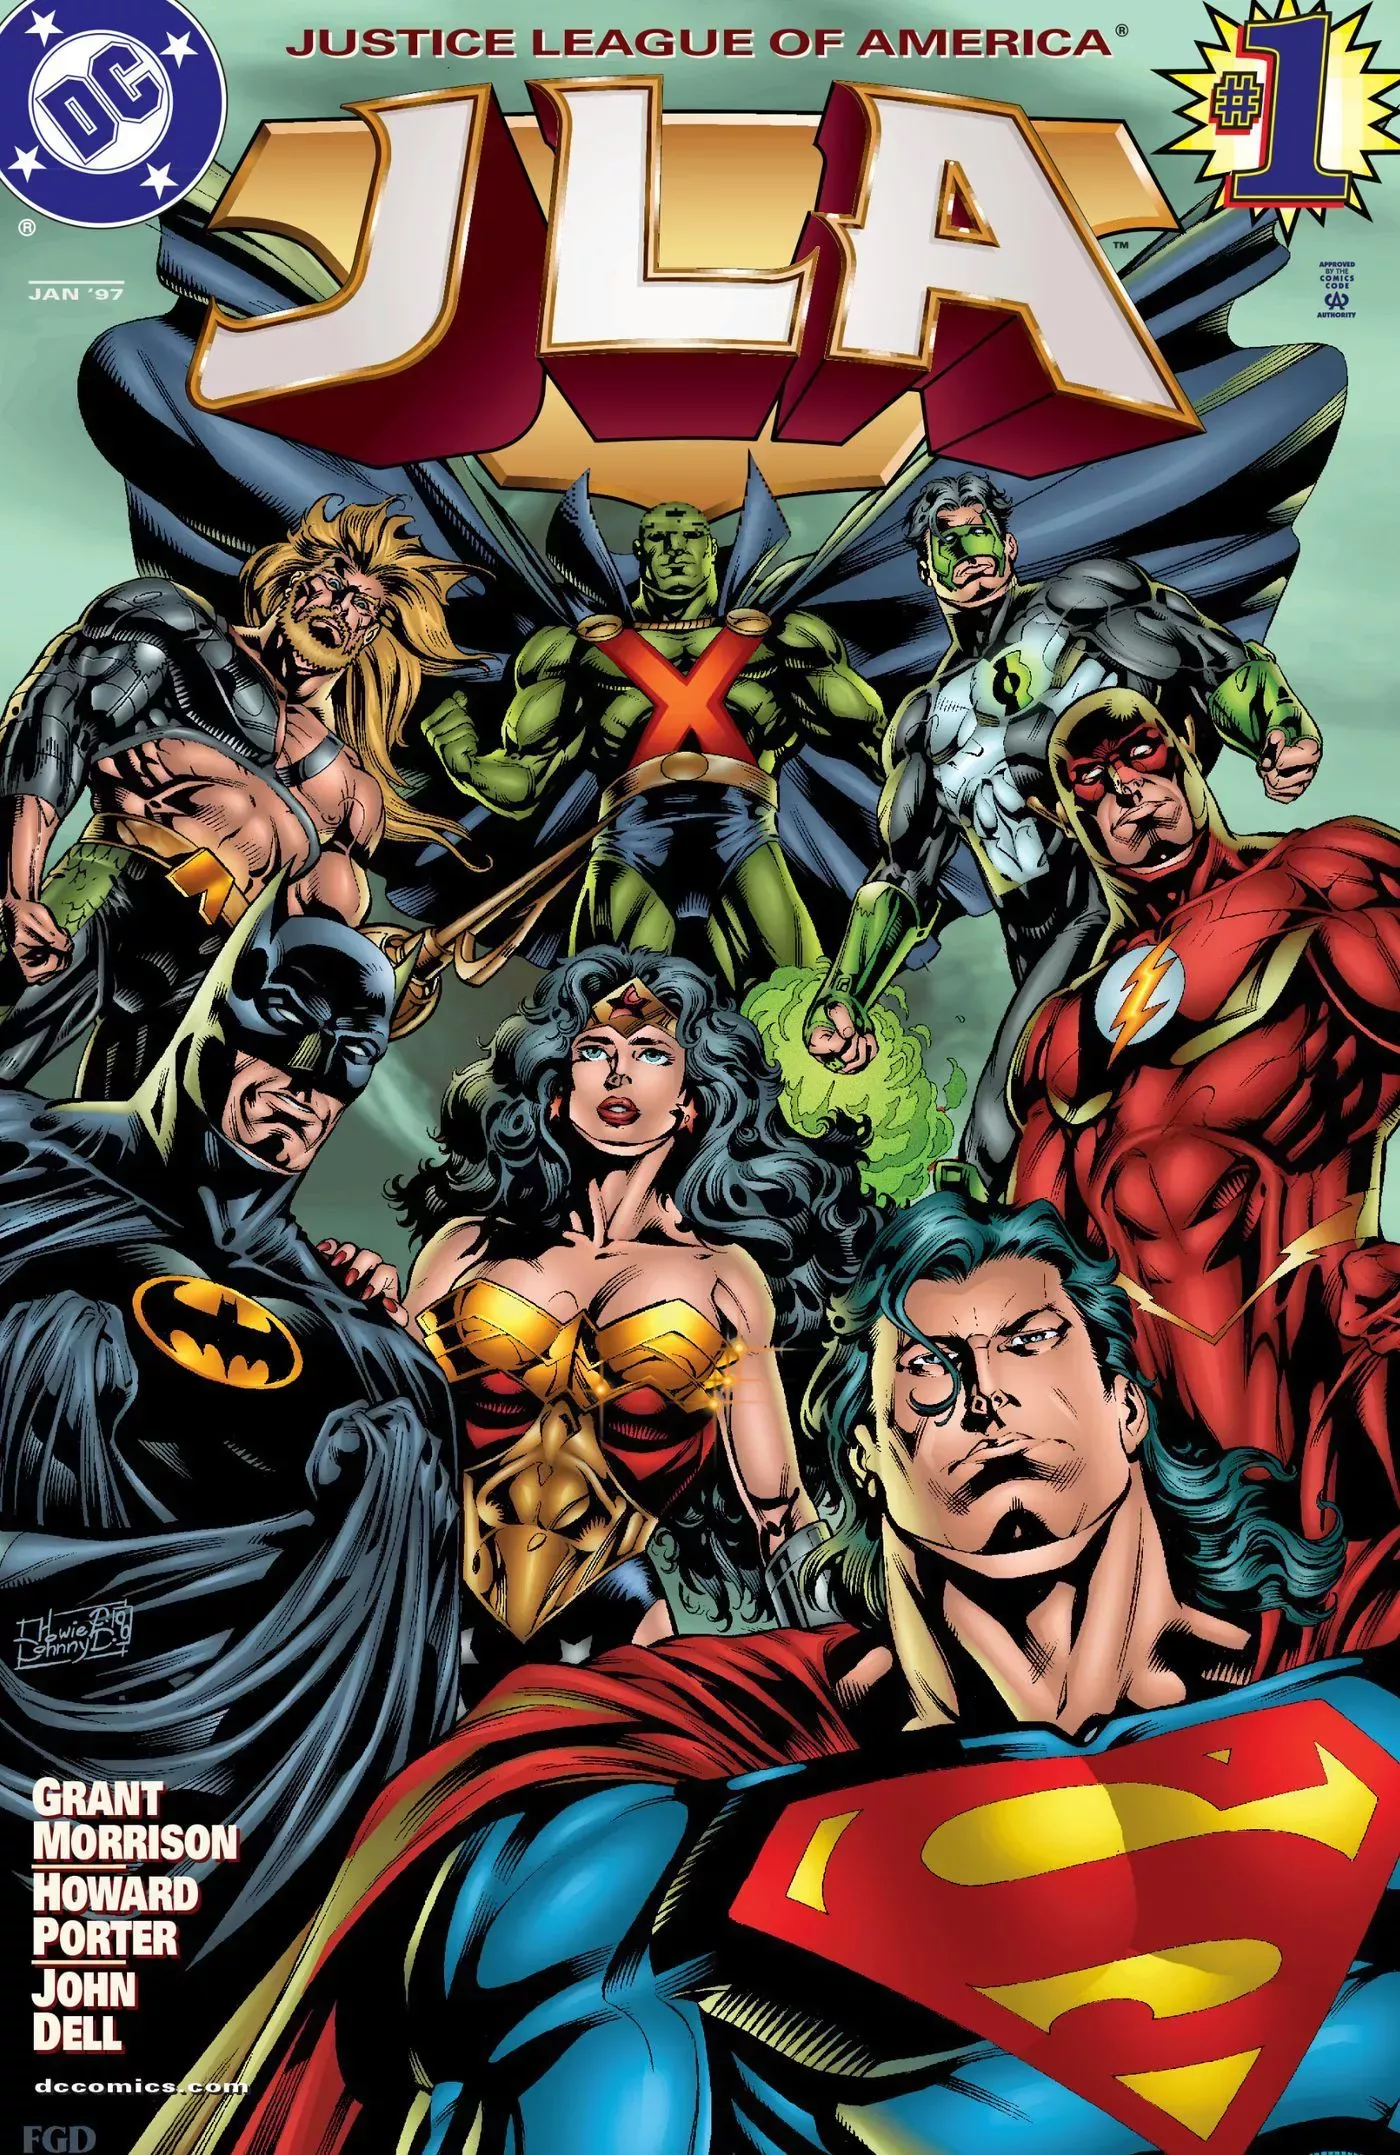 The Justice League Pose Together on the Justice League of America 1 Cover